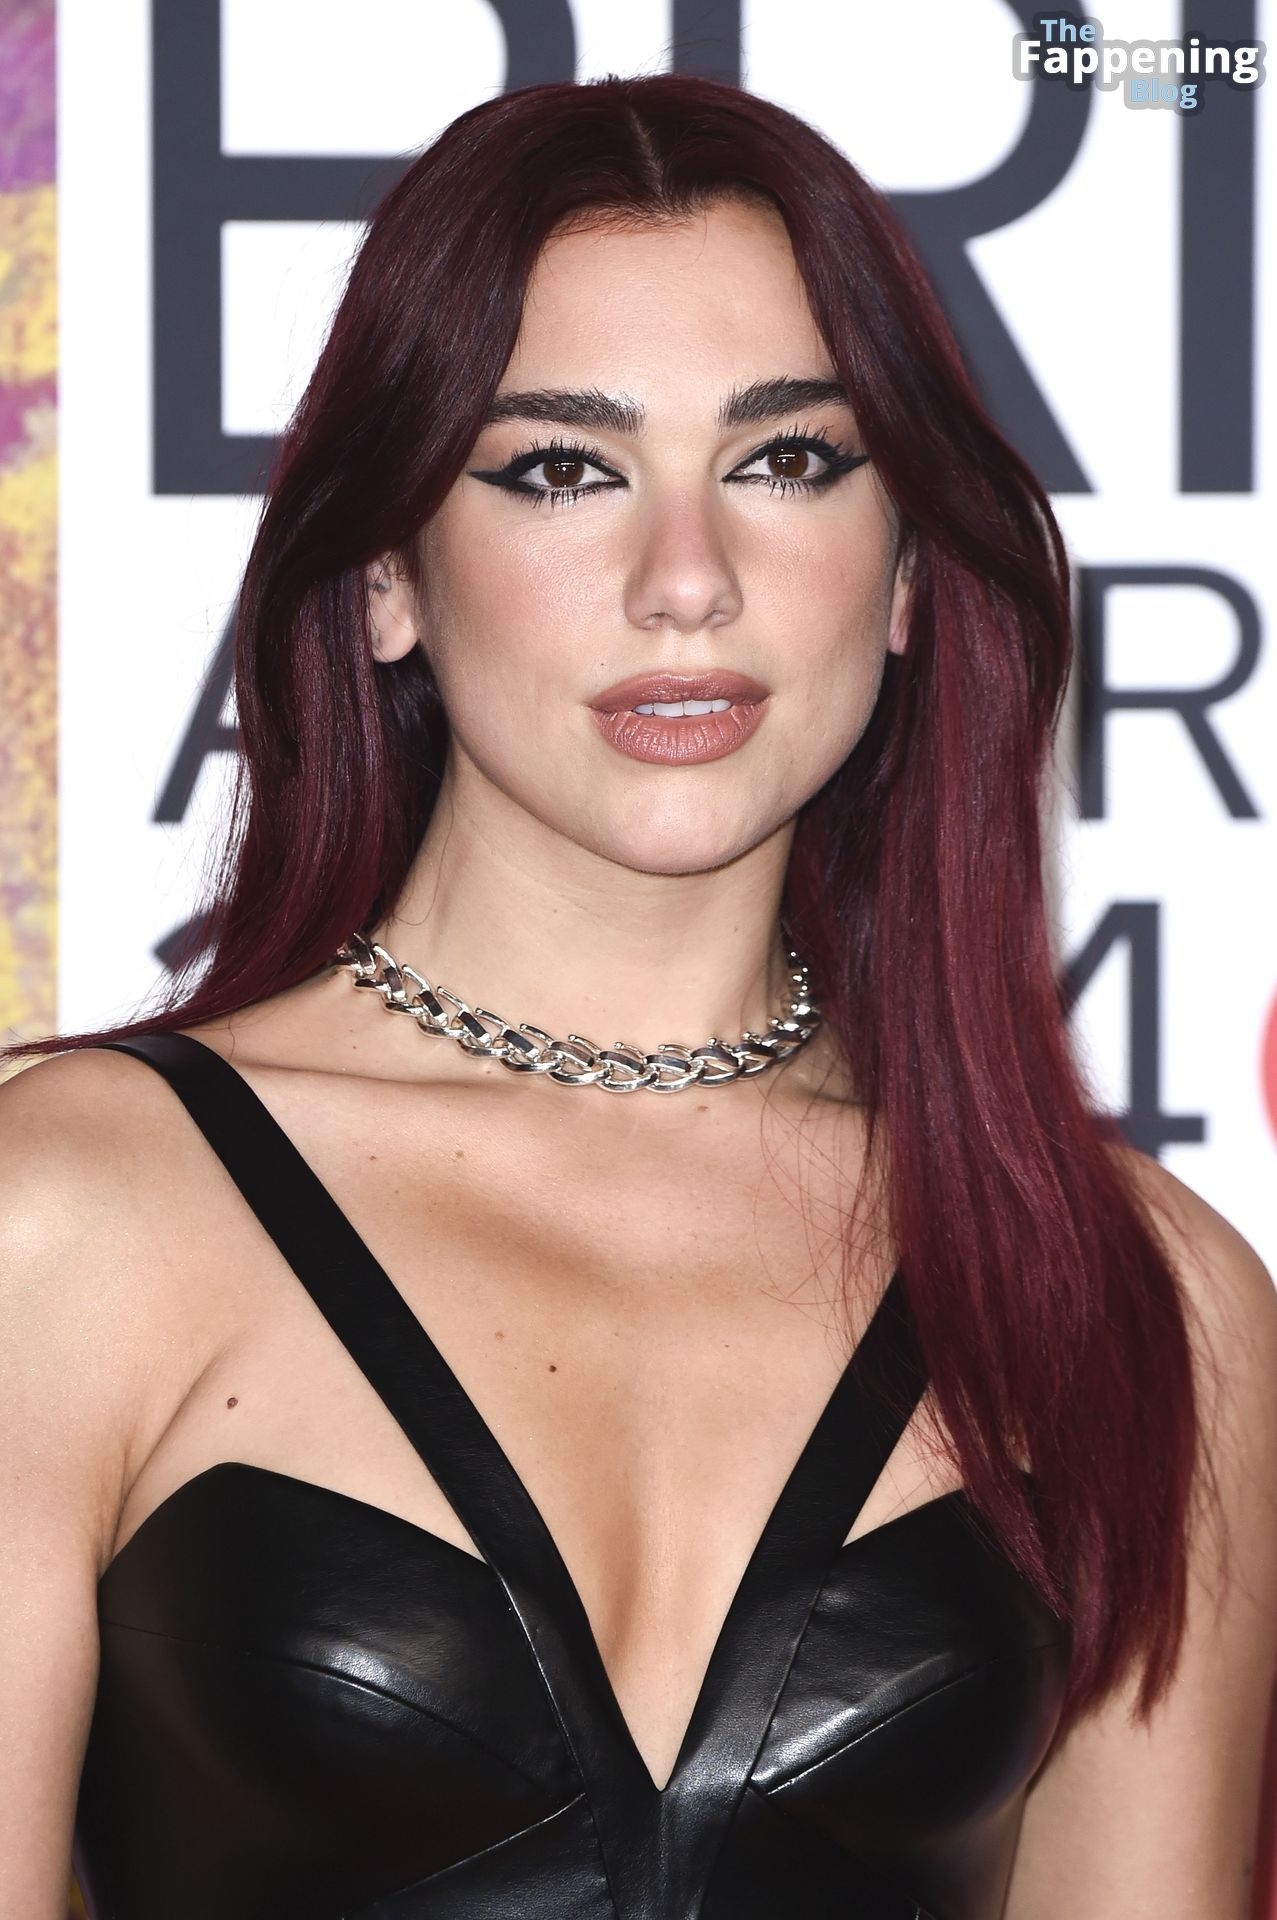 Dua Lipa Flaunts Her Sexy Figure at The BRIT Awards in London (111 Photos)